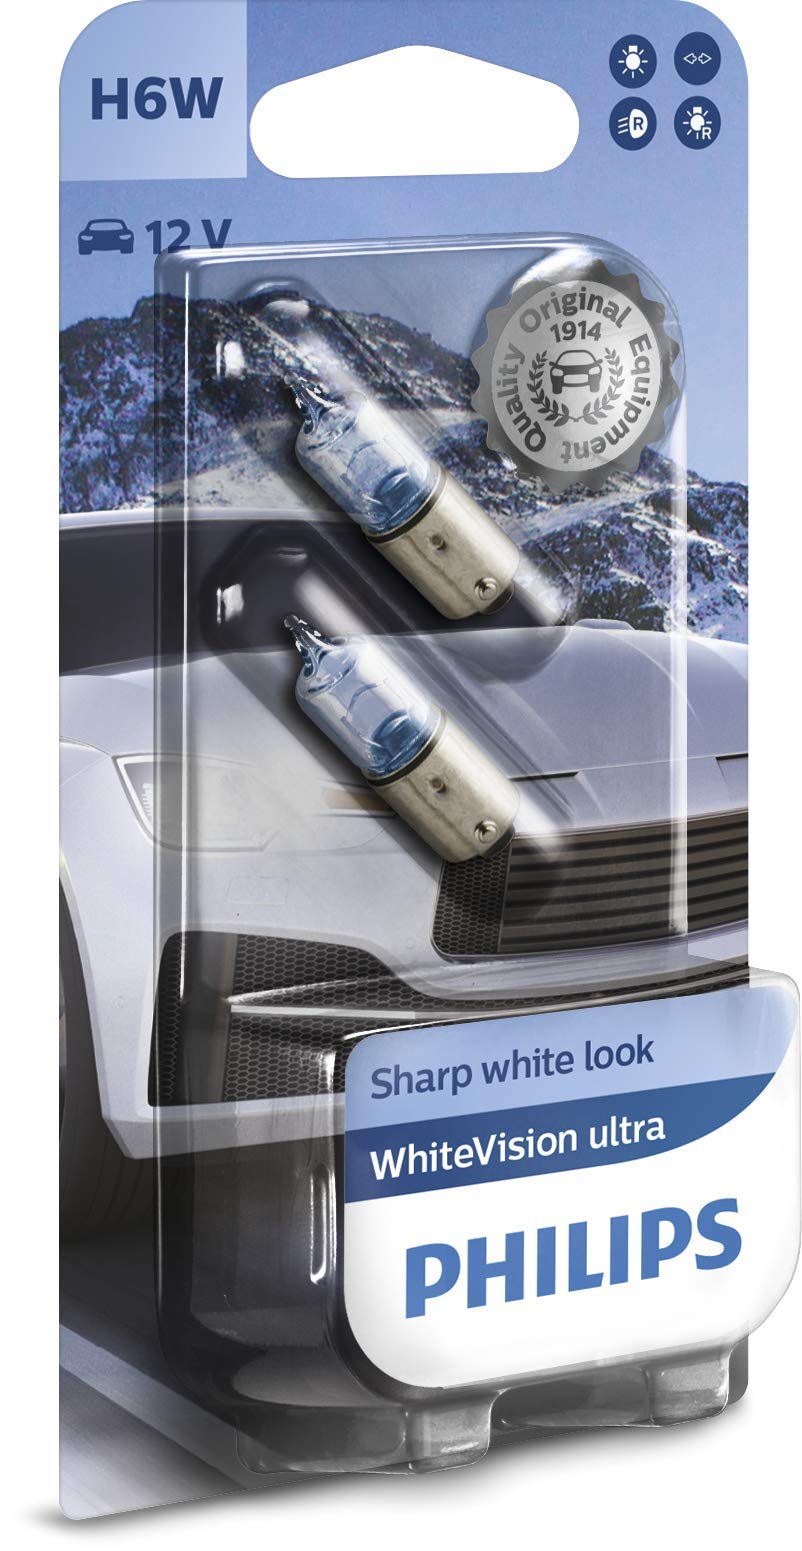 Philips WhiteVision ultra H6W Signallampe, Doppelblister, 543430, Double blister von Philips automotive lighting